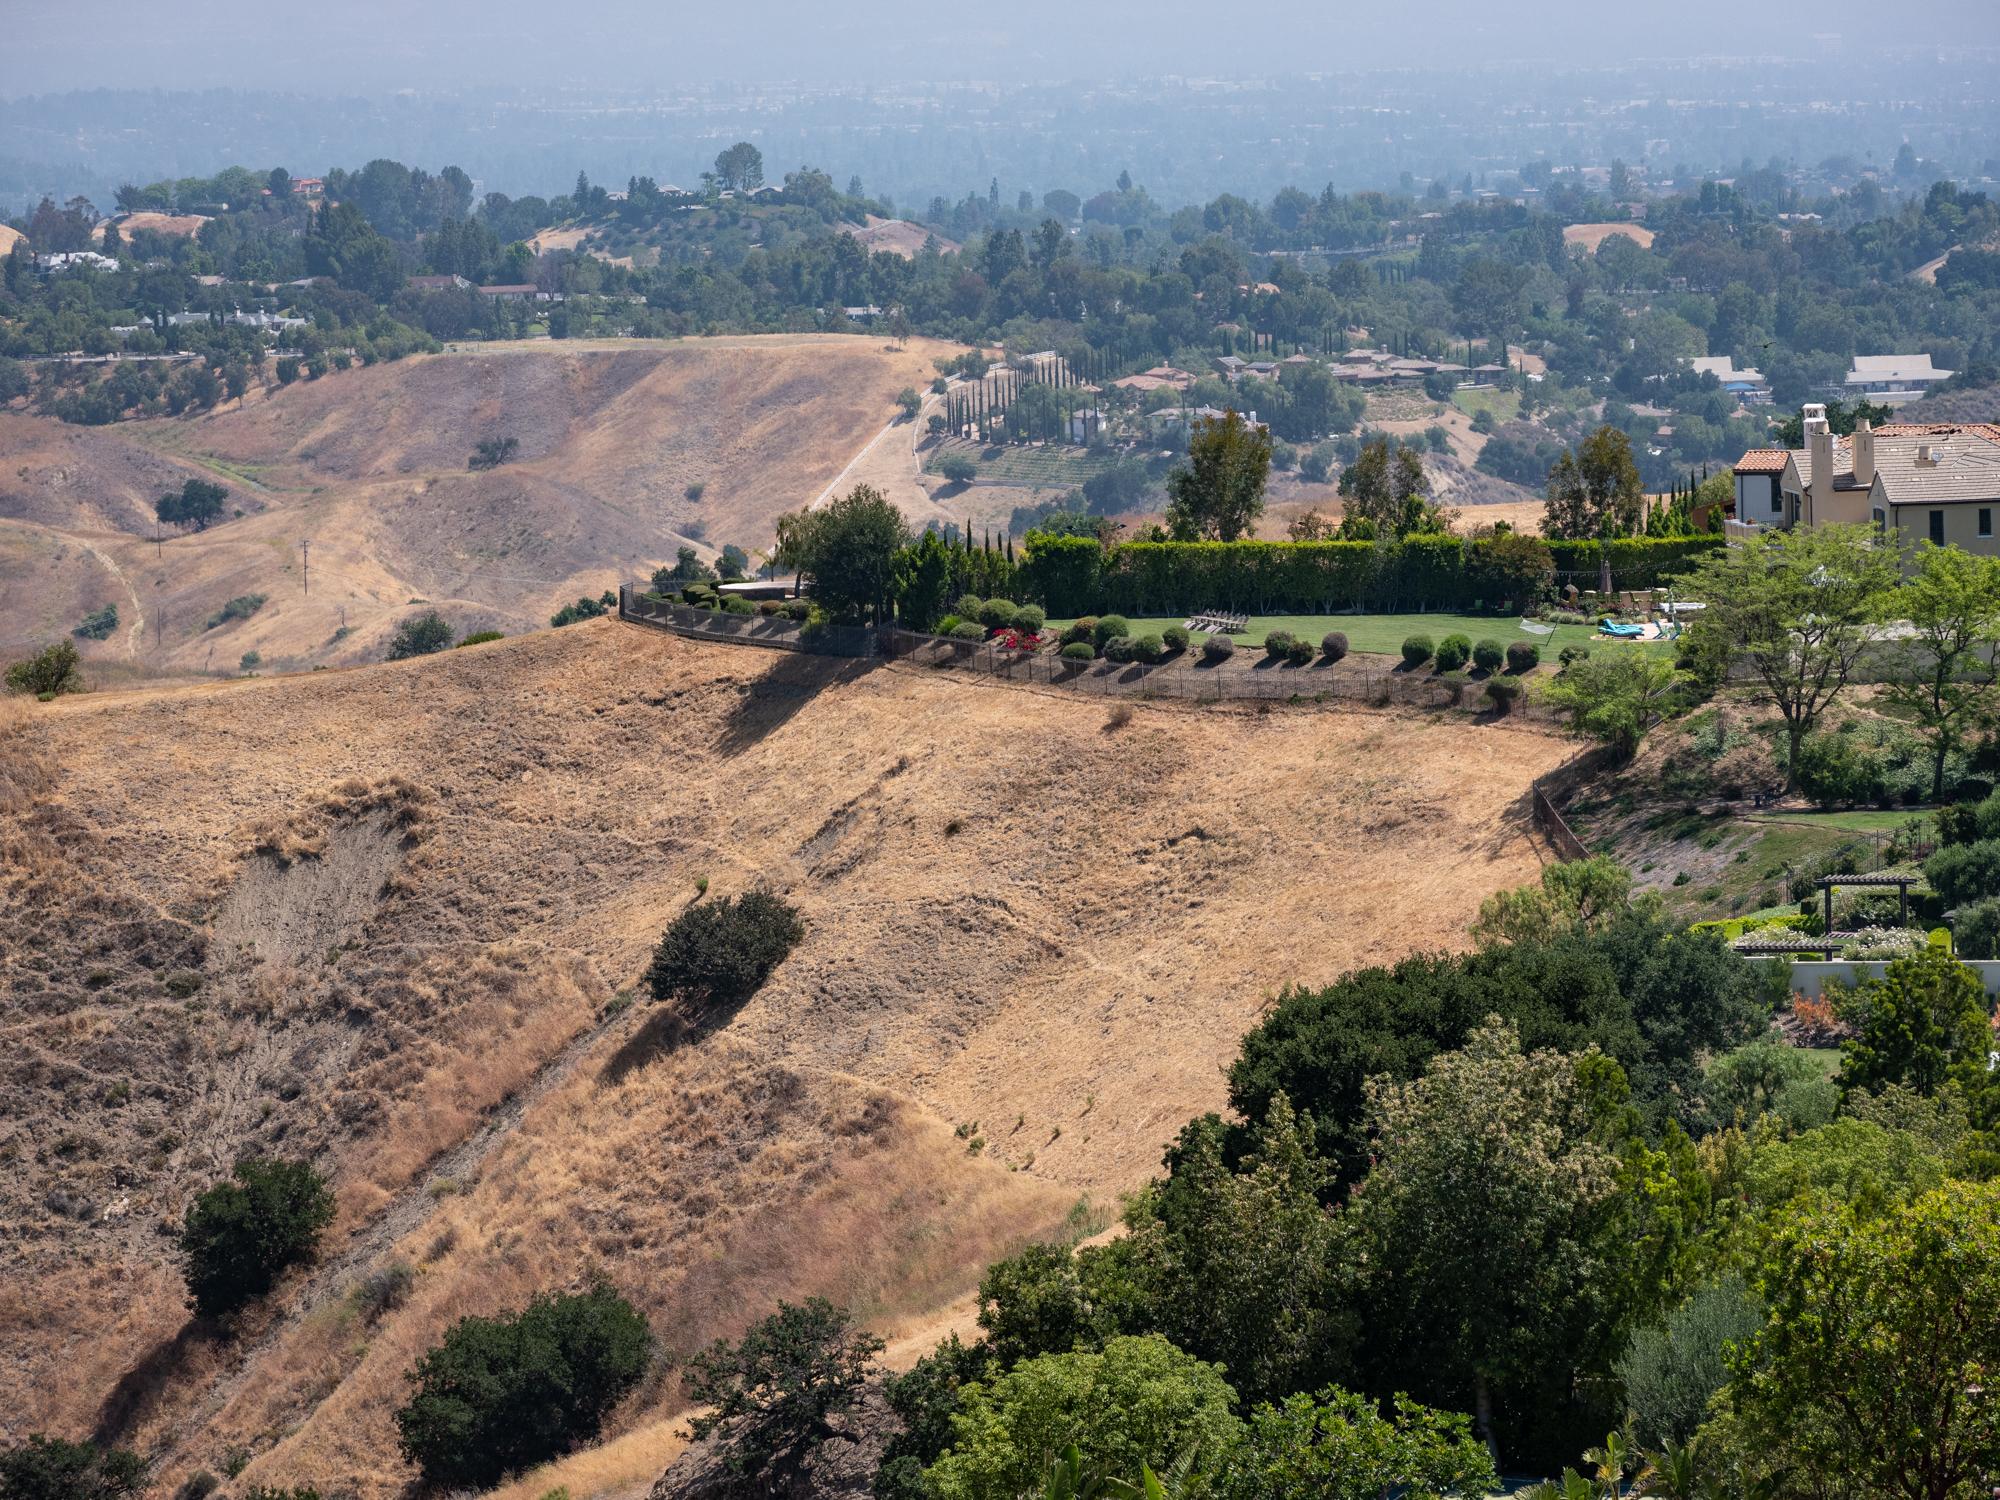 Water Cops - Wall Street Journal - Views of The Oaks gated community and surrounding hills...